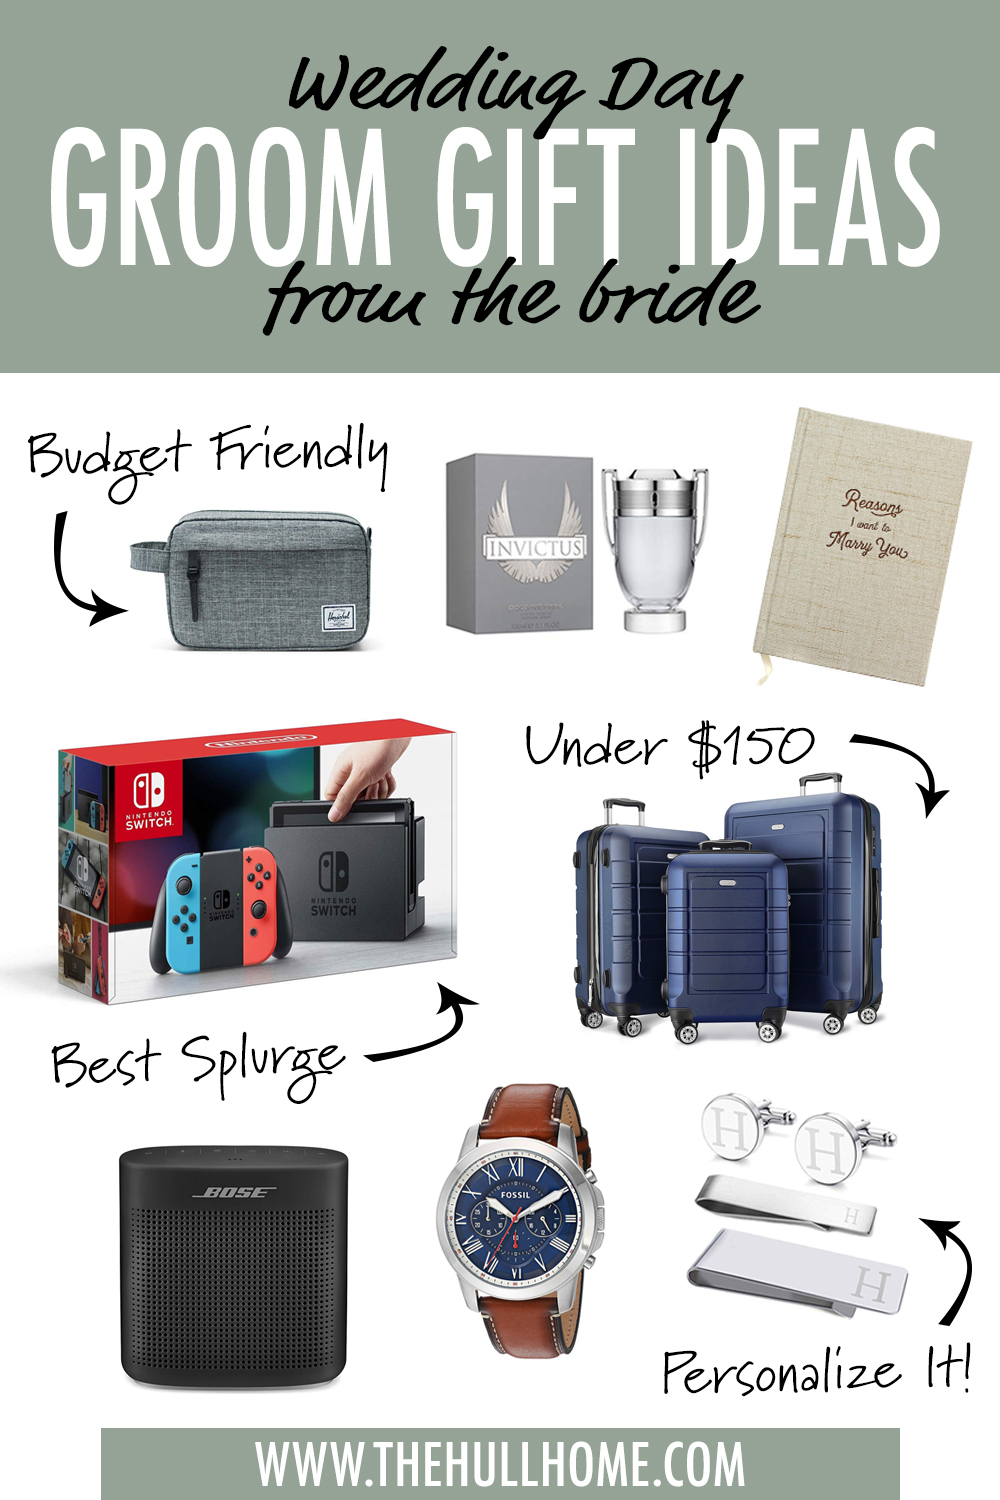 Wedding day gift ideas for the groom from the bride.